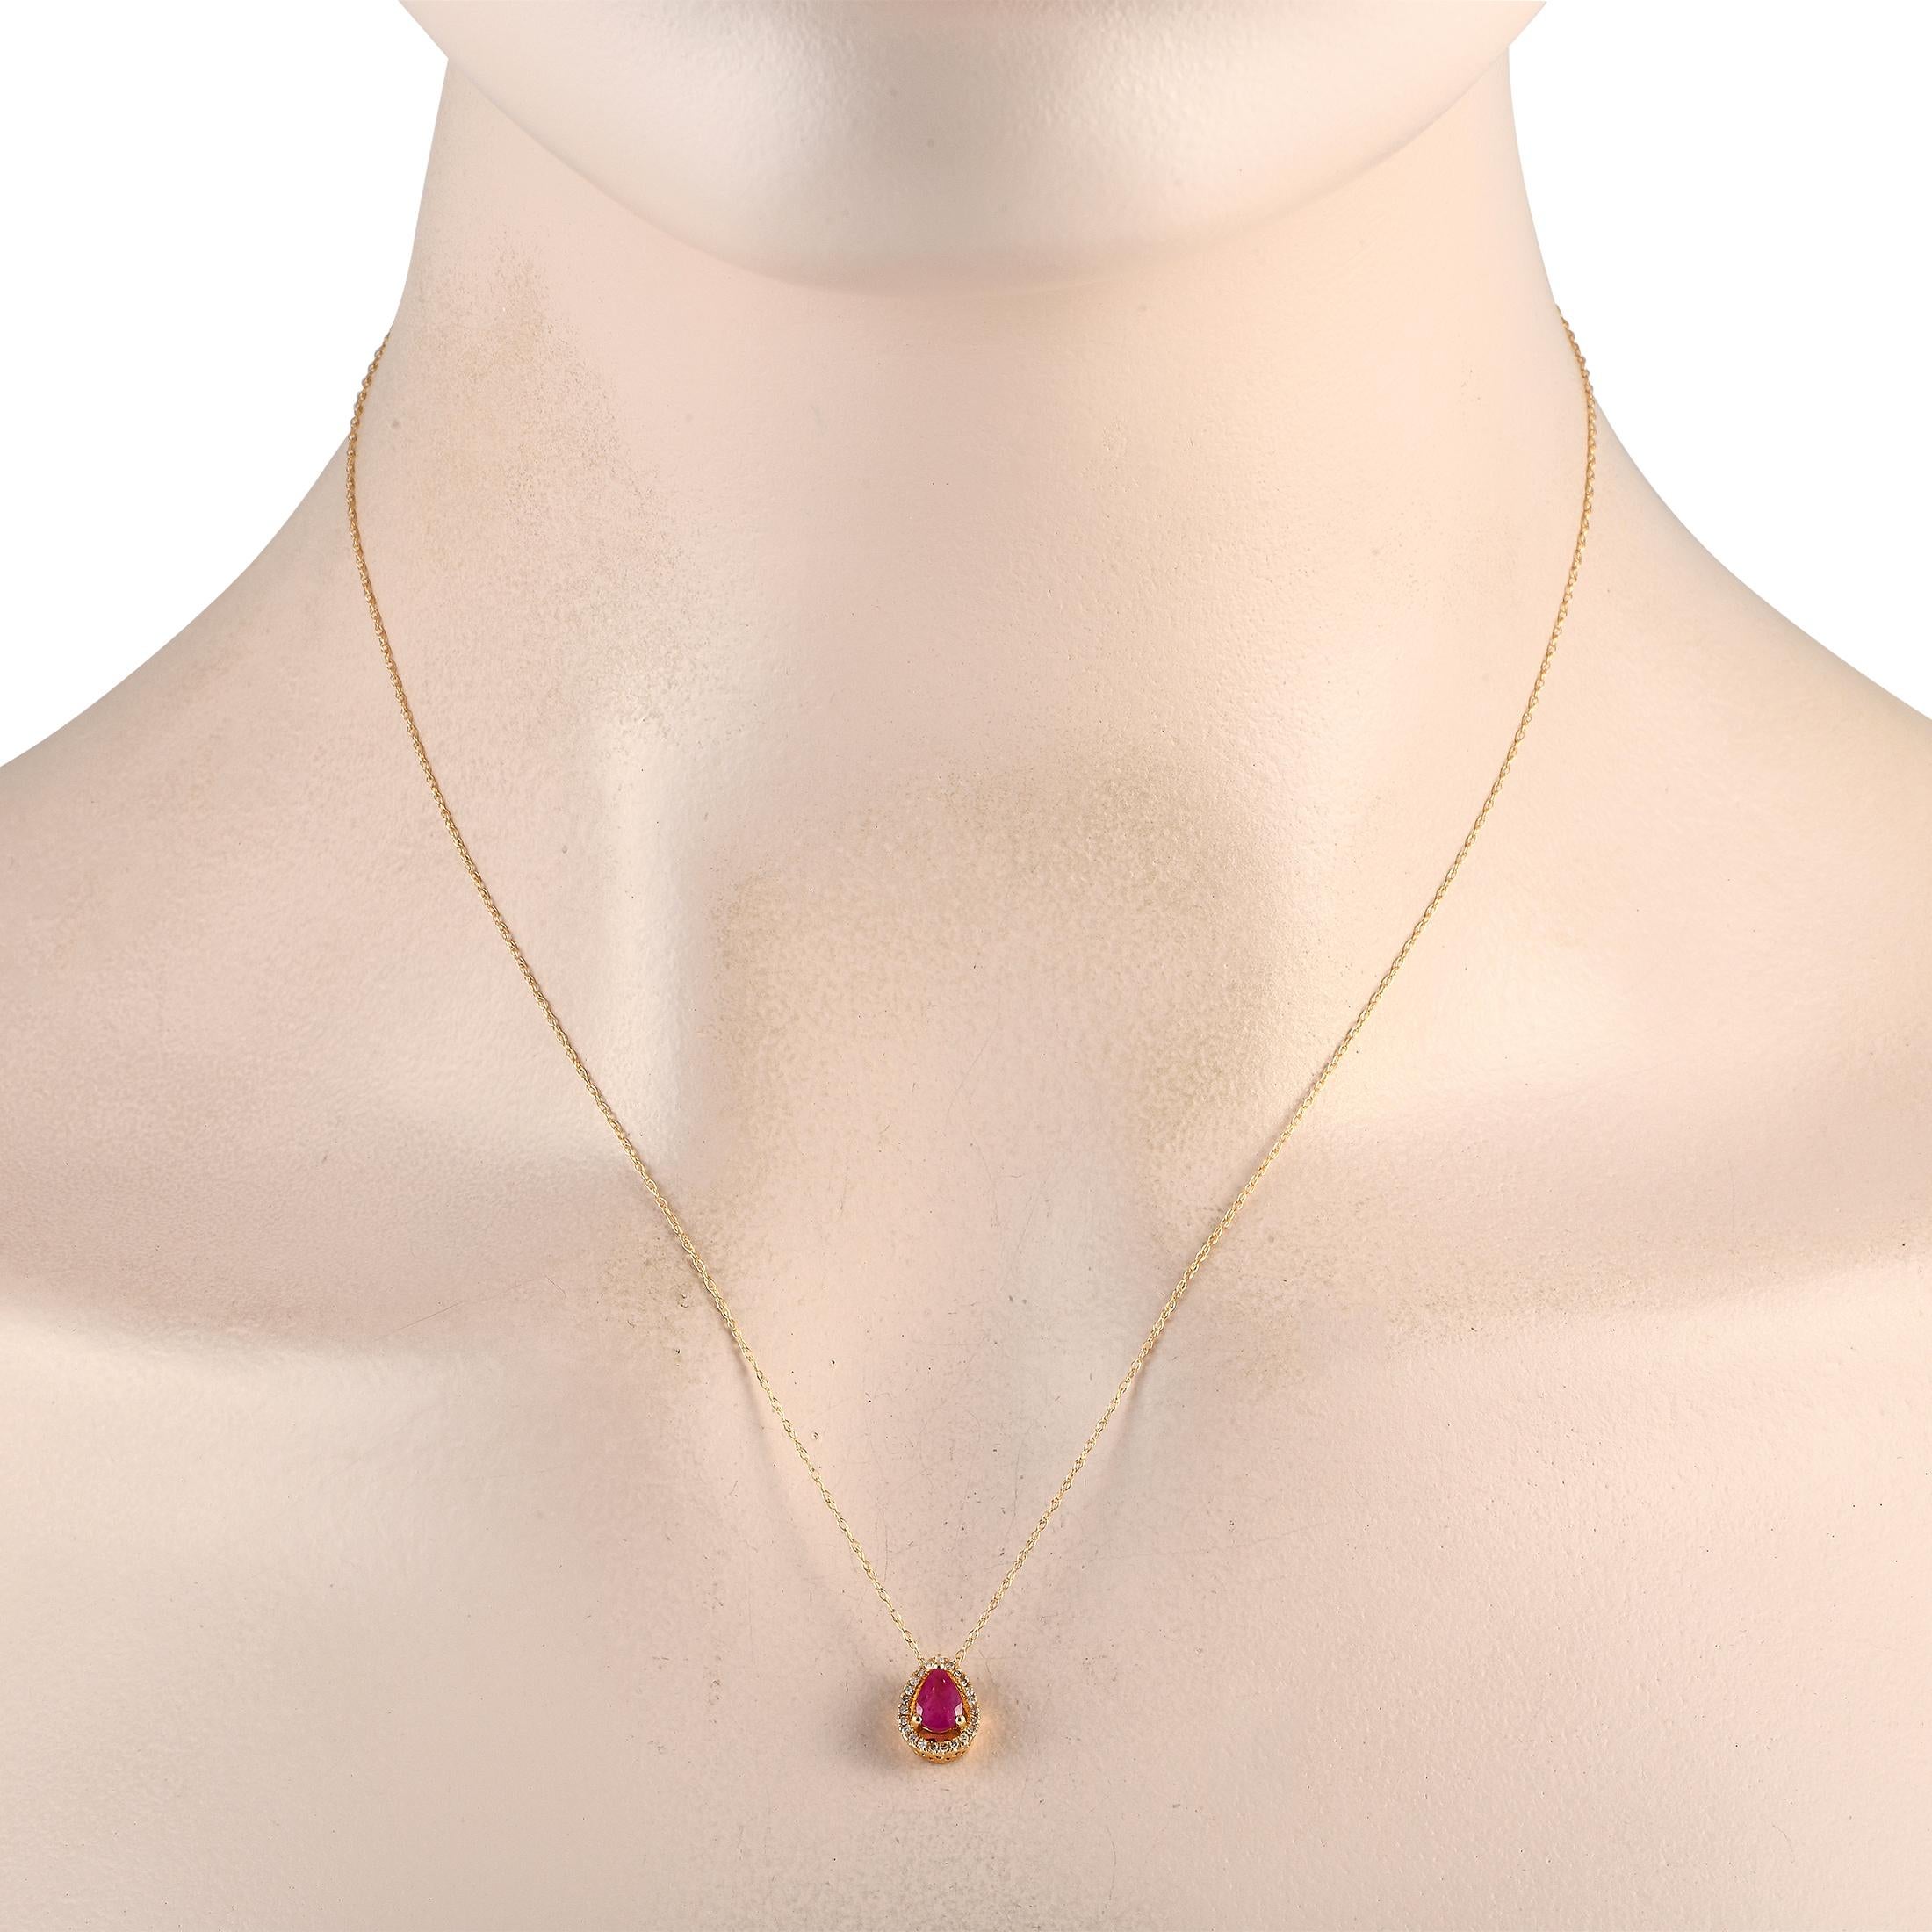 This luxurious necklace will never go out of style. On this piece, a 14K yellow gold pendant measuring 0.45 long by 0.25 wide is suspended from a delicate 18 chain. It includes a stunning ruby center stone and additional diamond accents totaling